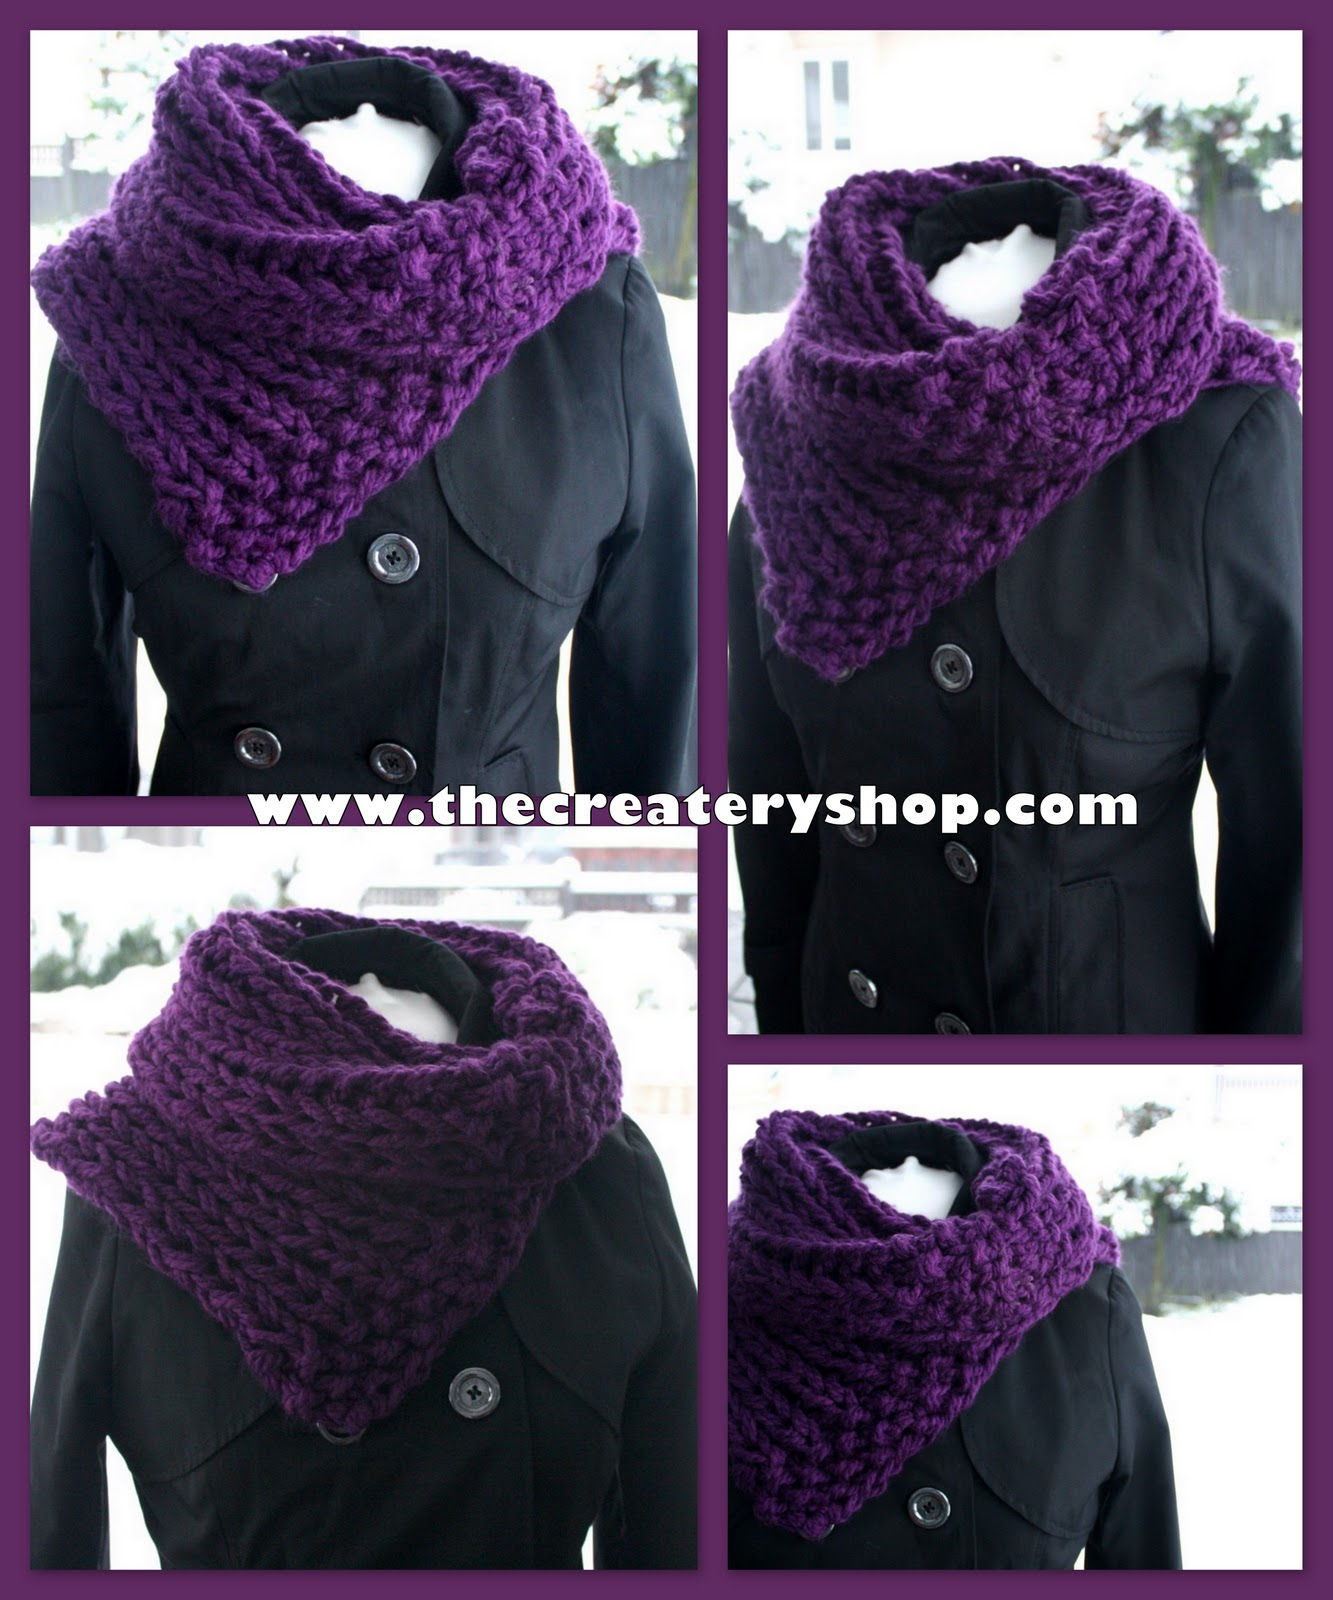 Easy Cowl Knitting Patterns The Createry Shop Free Easy 3c Chunky Collar Cowl Knitting Pattern